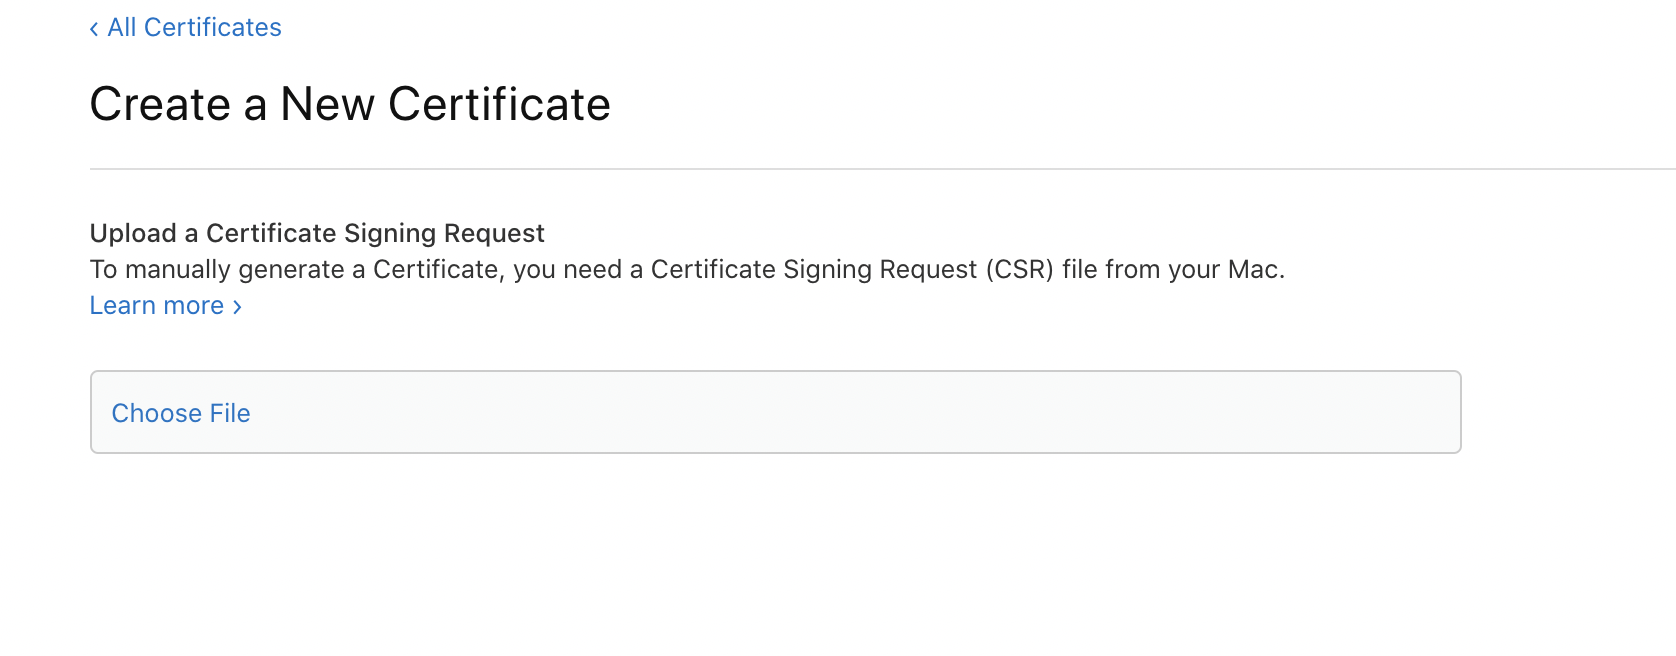 Select Certificate Signing Request